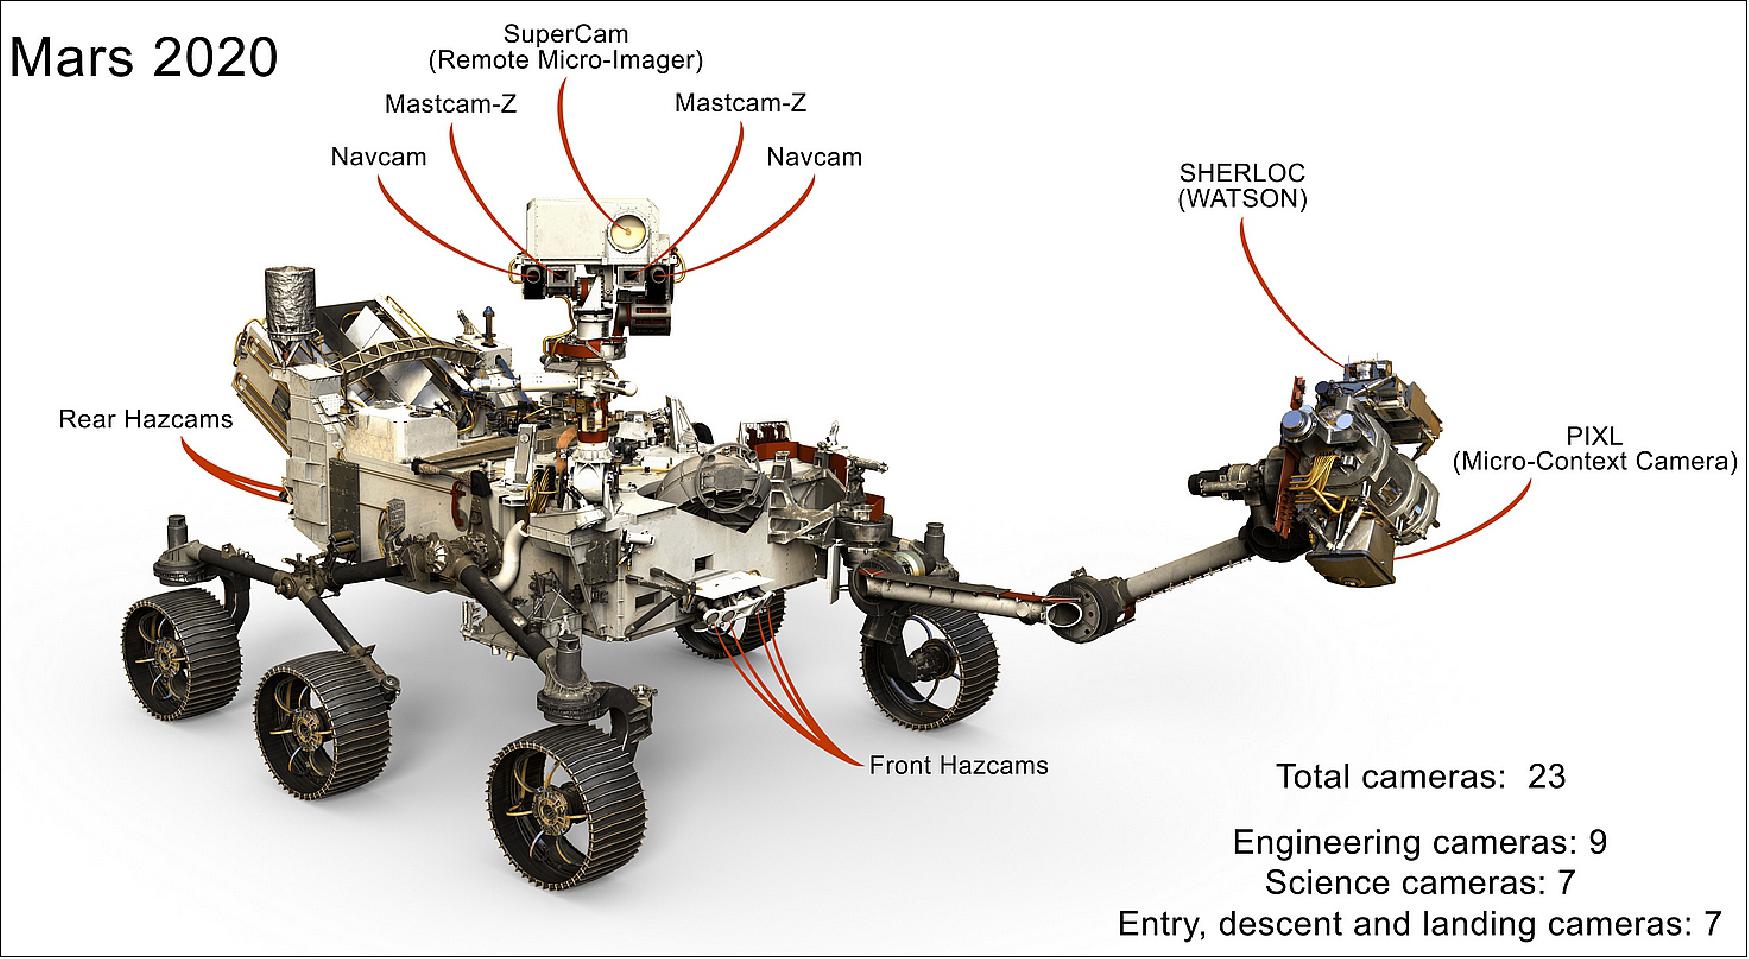 Figure 7: Overview of the Cameras on the Mars 2020 Perseverance Rover (image credit: NASA)